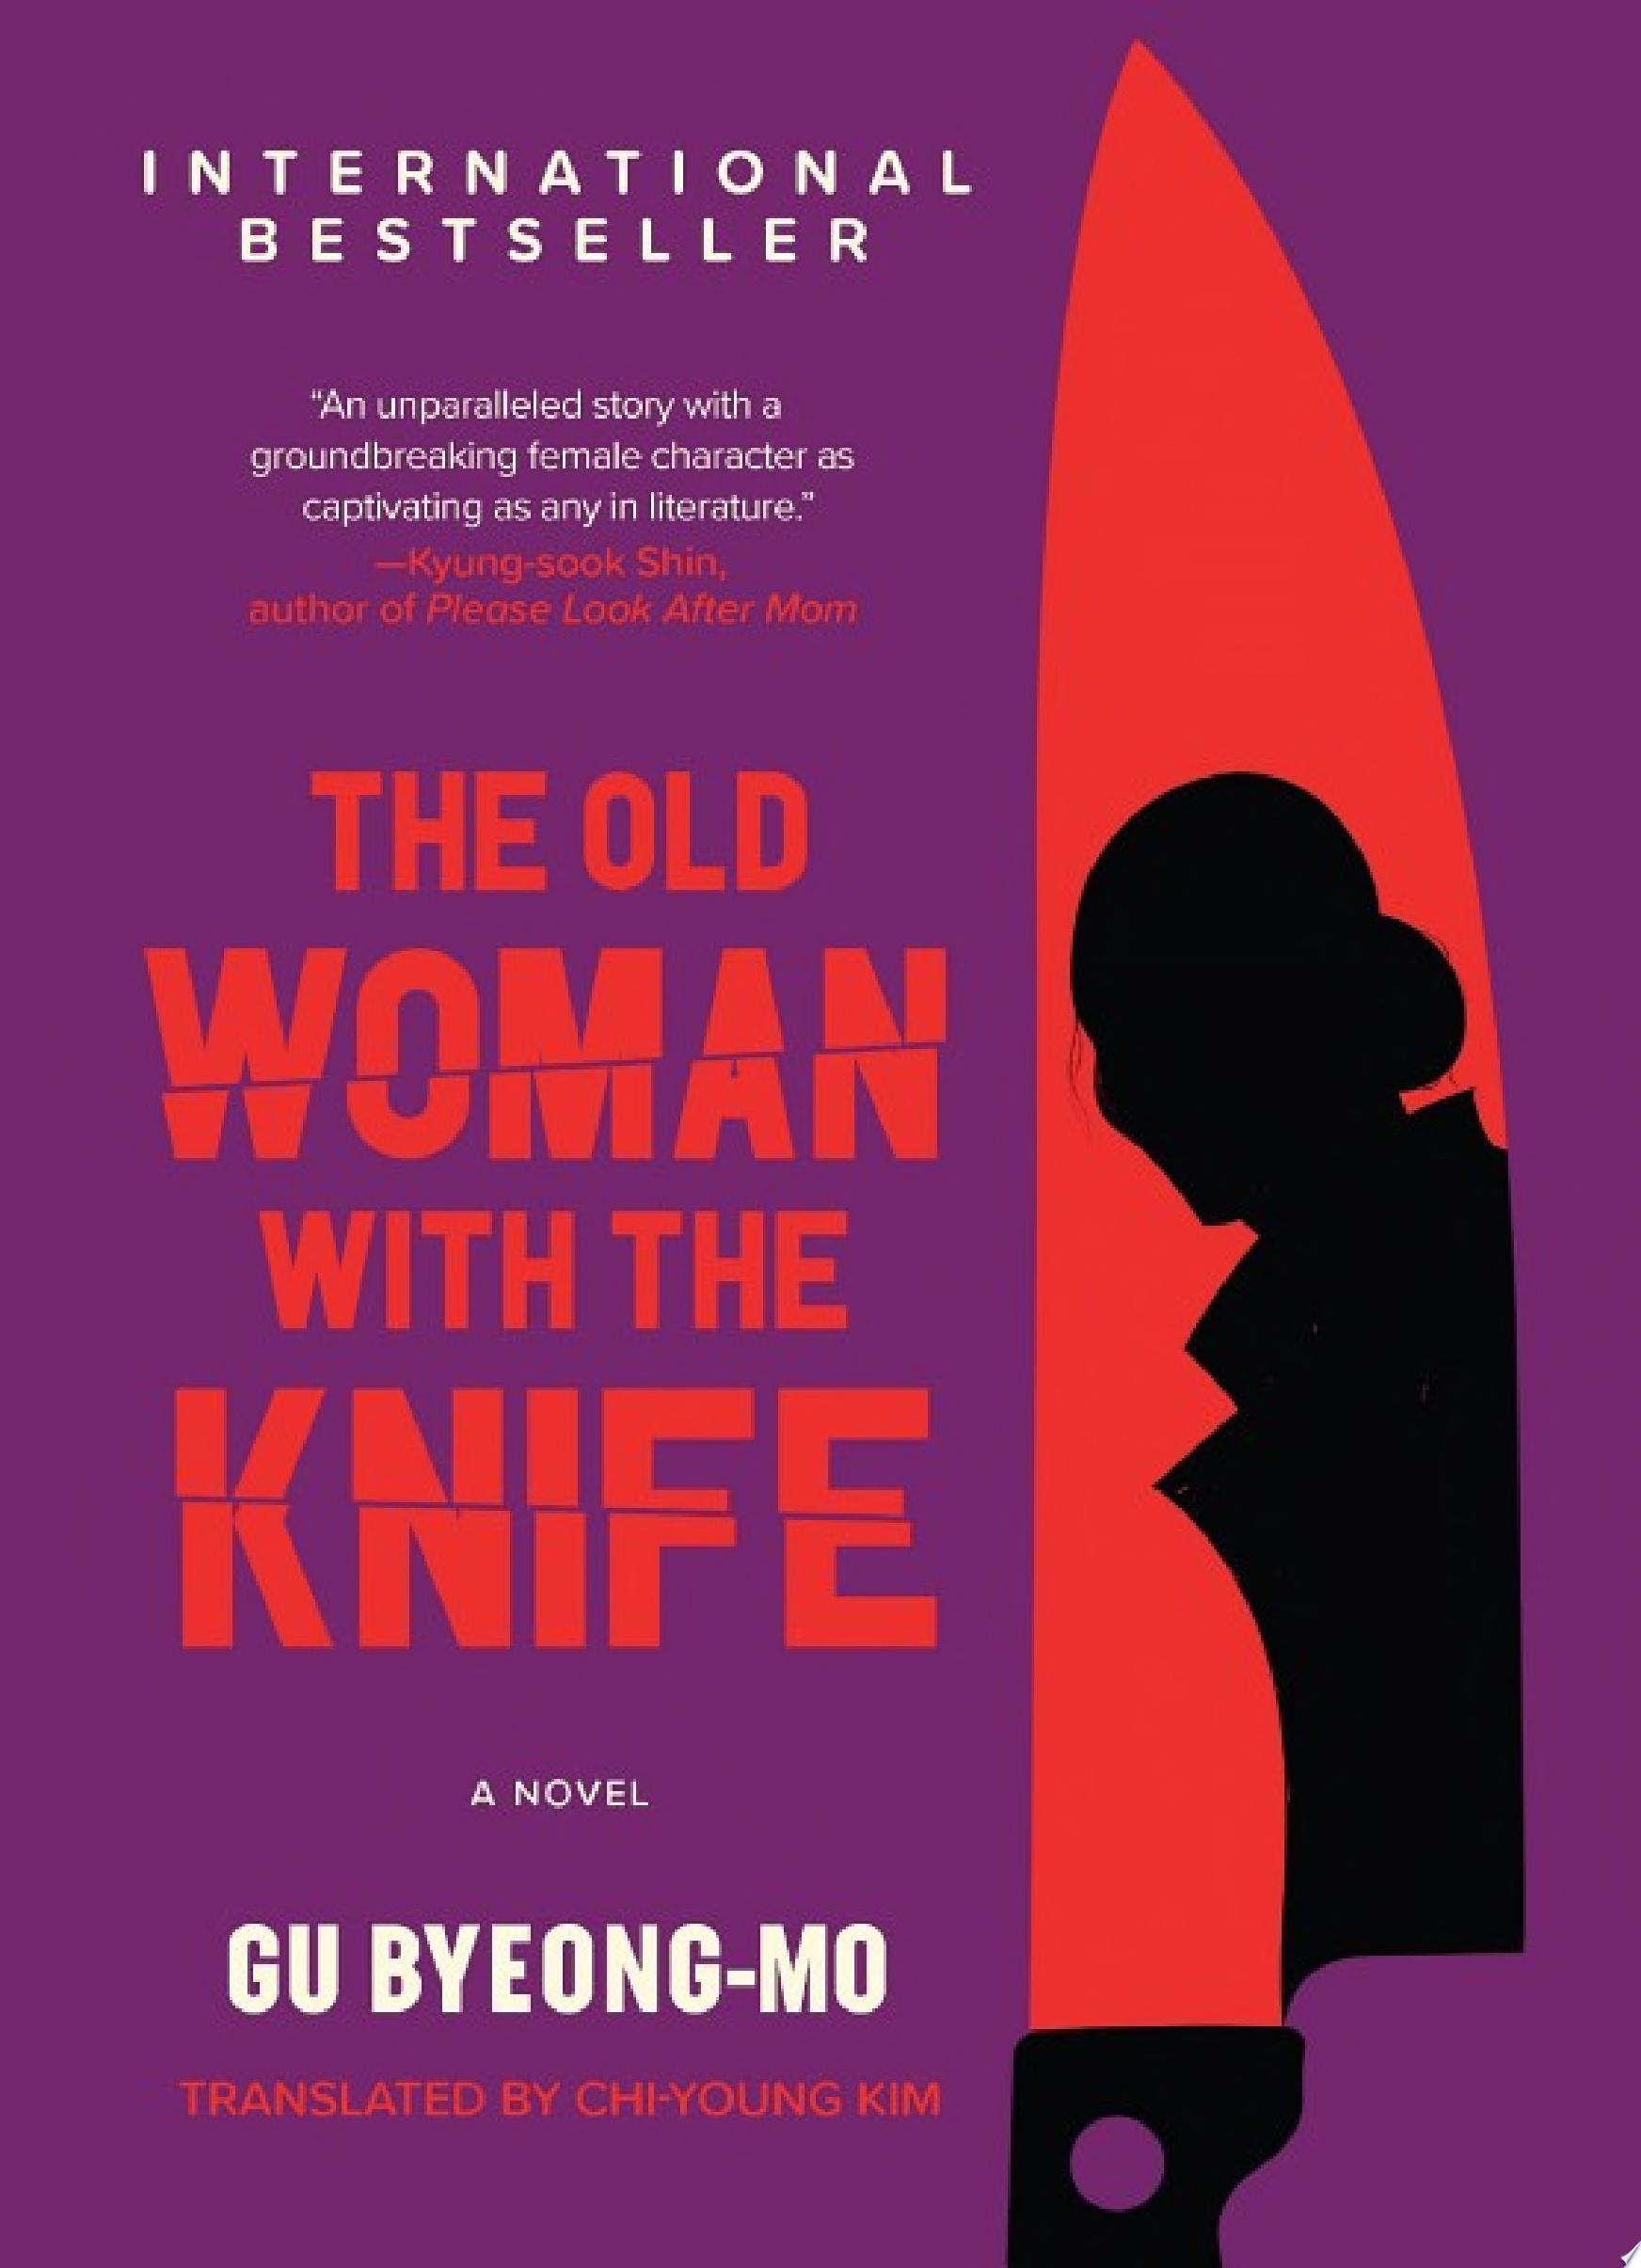 Image for "The Old Woman with the Knife"